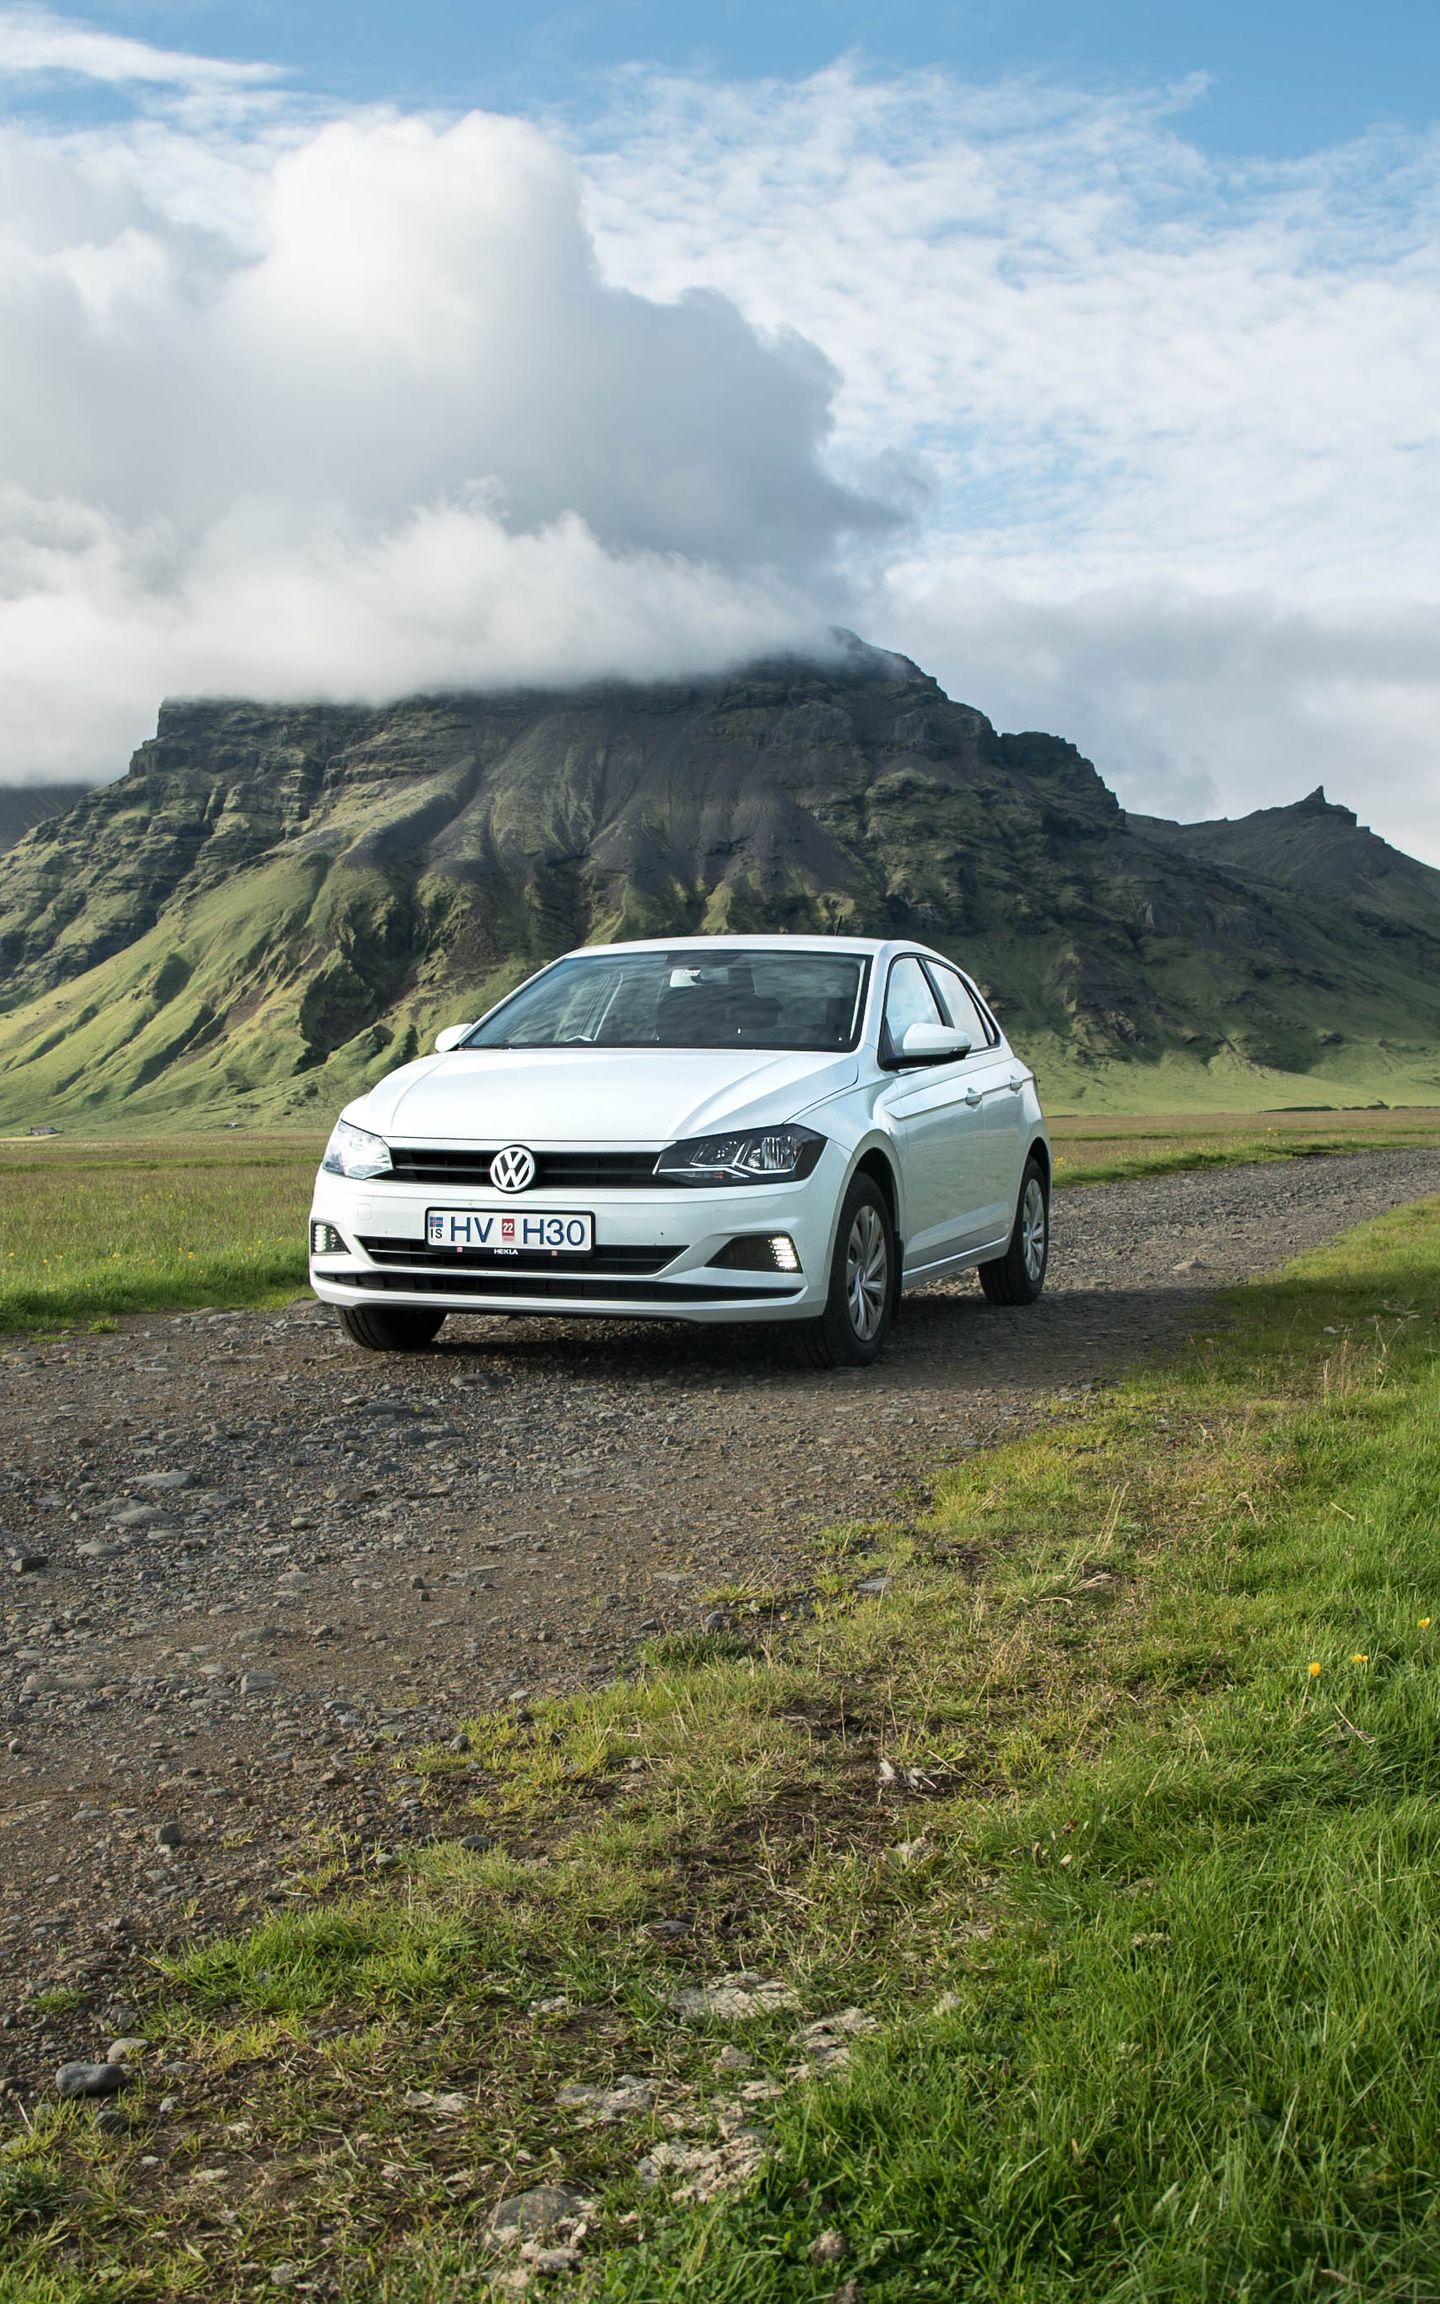 A small economy rental car traversing the beautiful Icelandic landscapes.